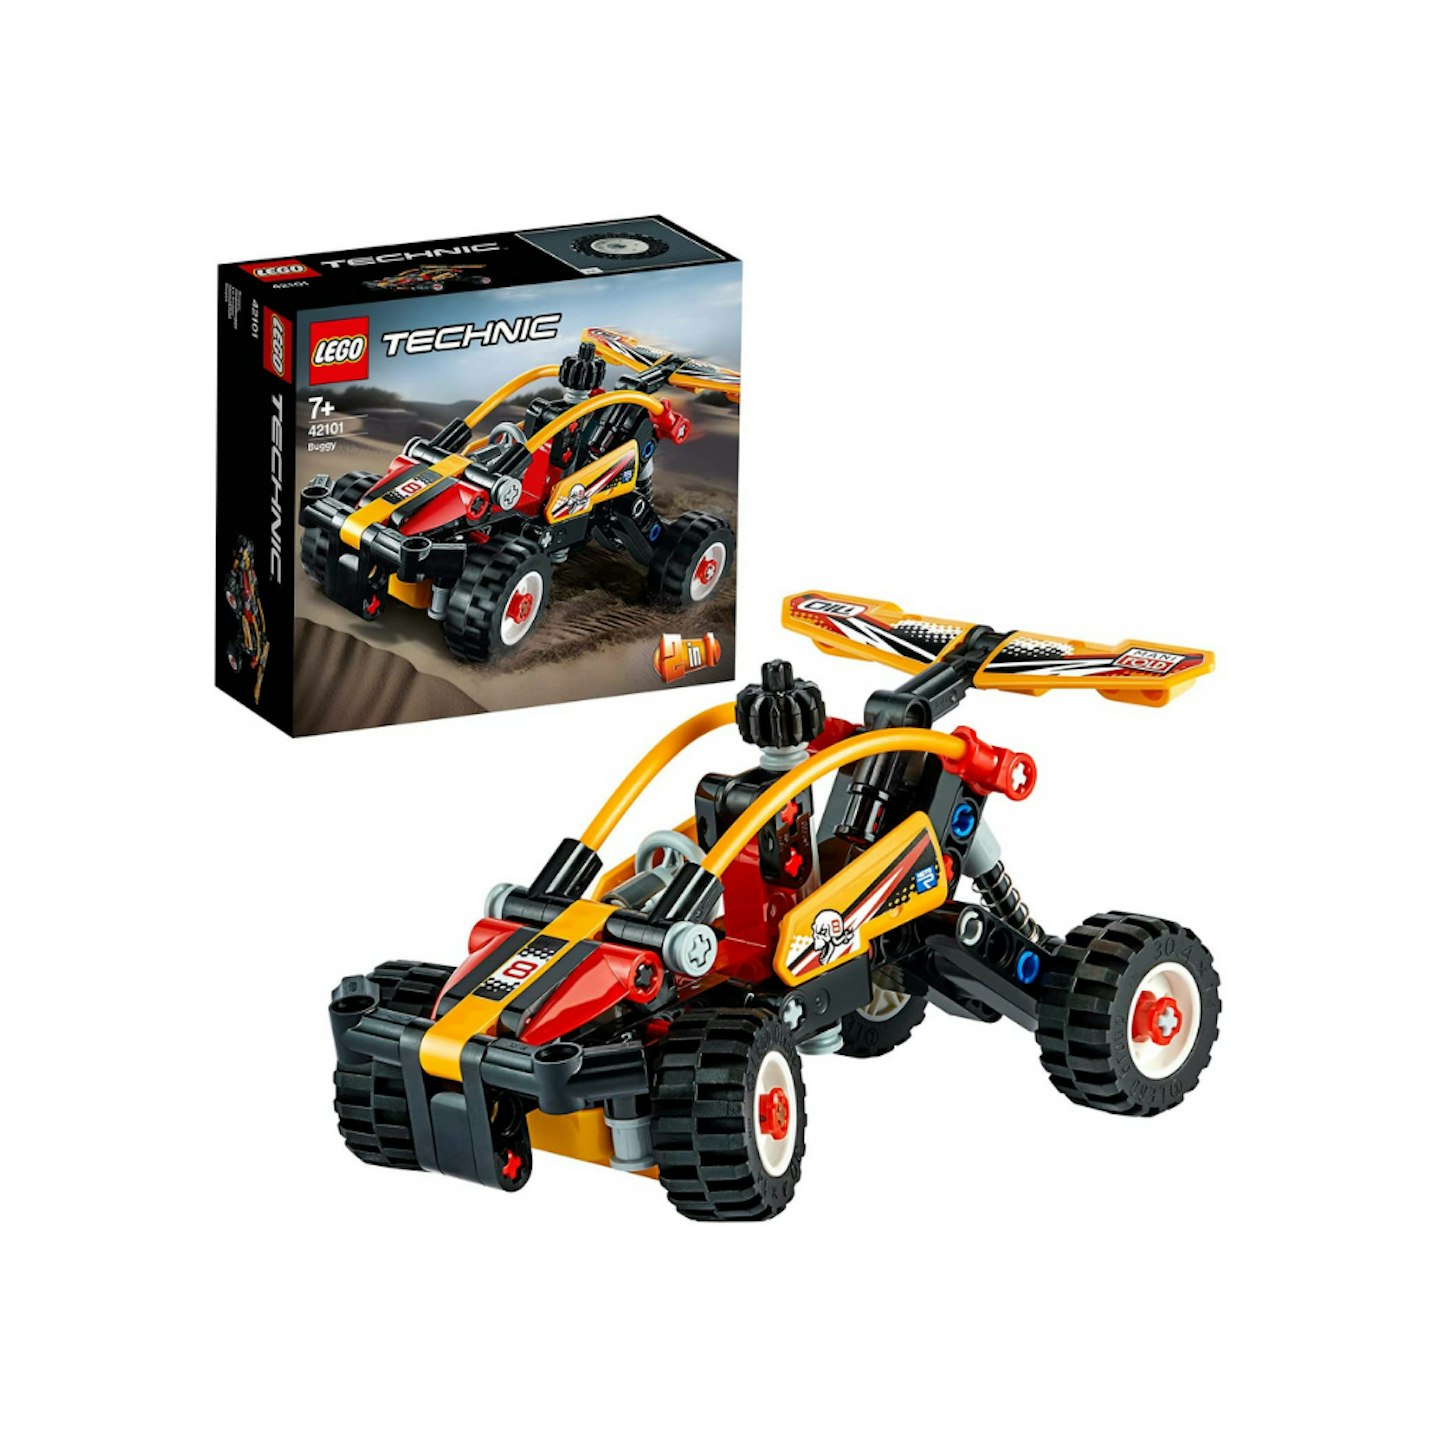 LEGO Technic Buggy to Racing Car 2in1 Building Set, Off Road & Race Vehicles Collection